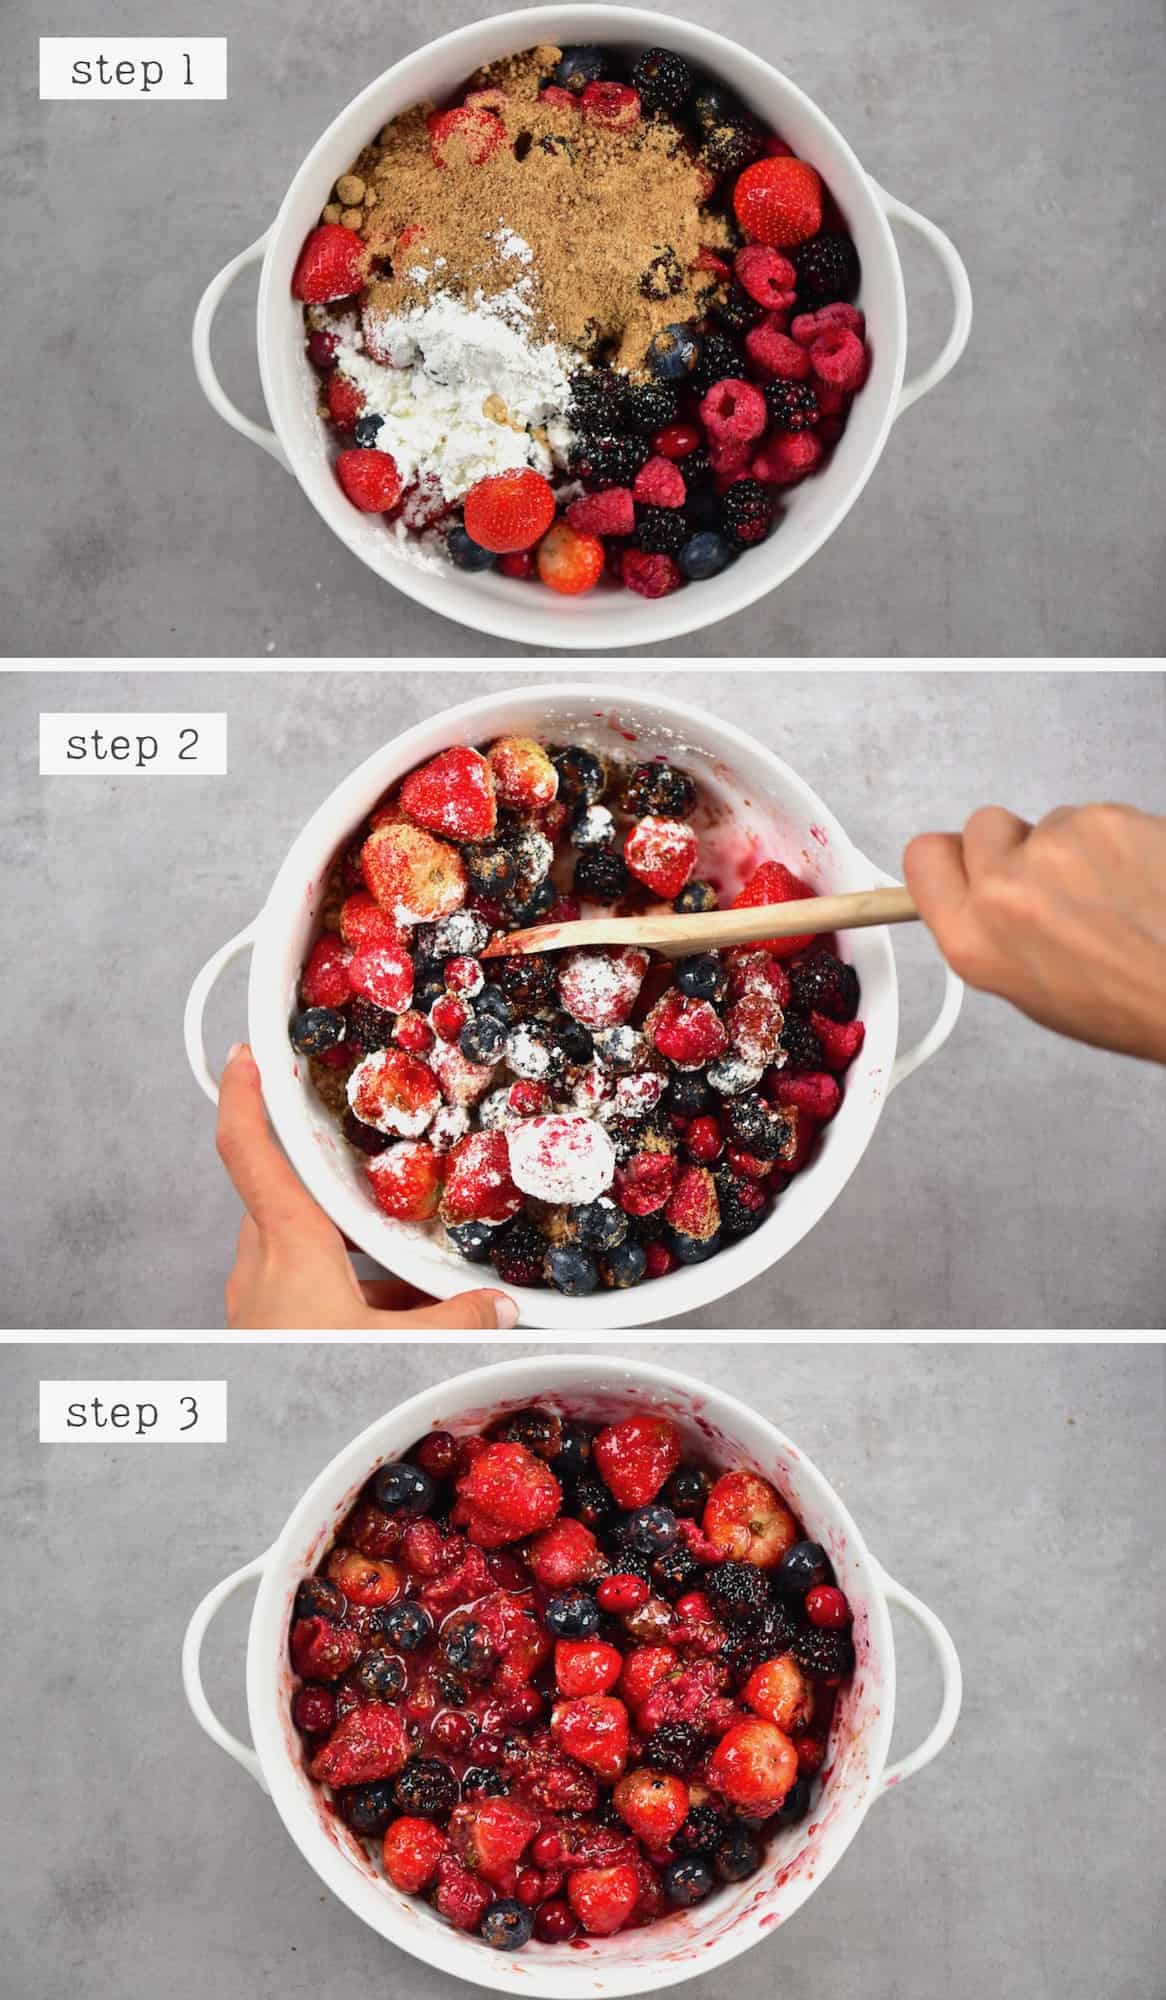 Steps for making crumble berry mixture